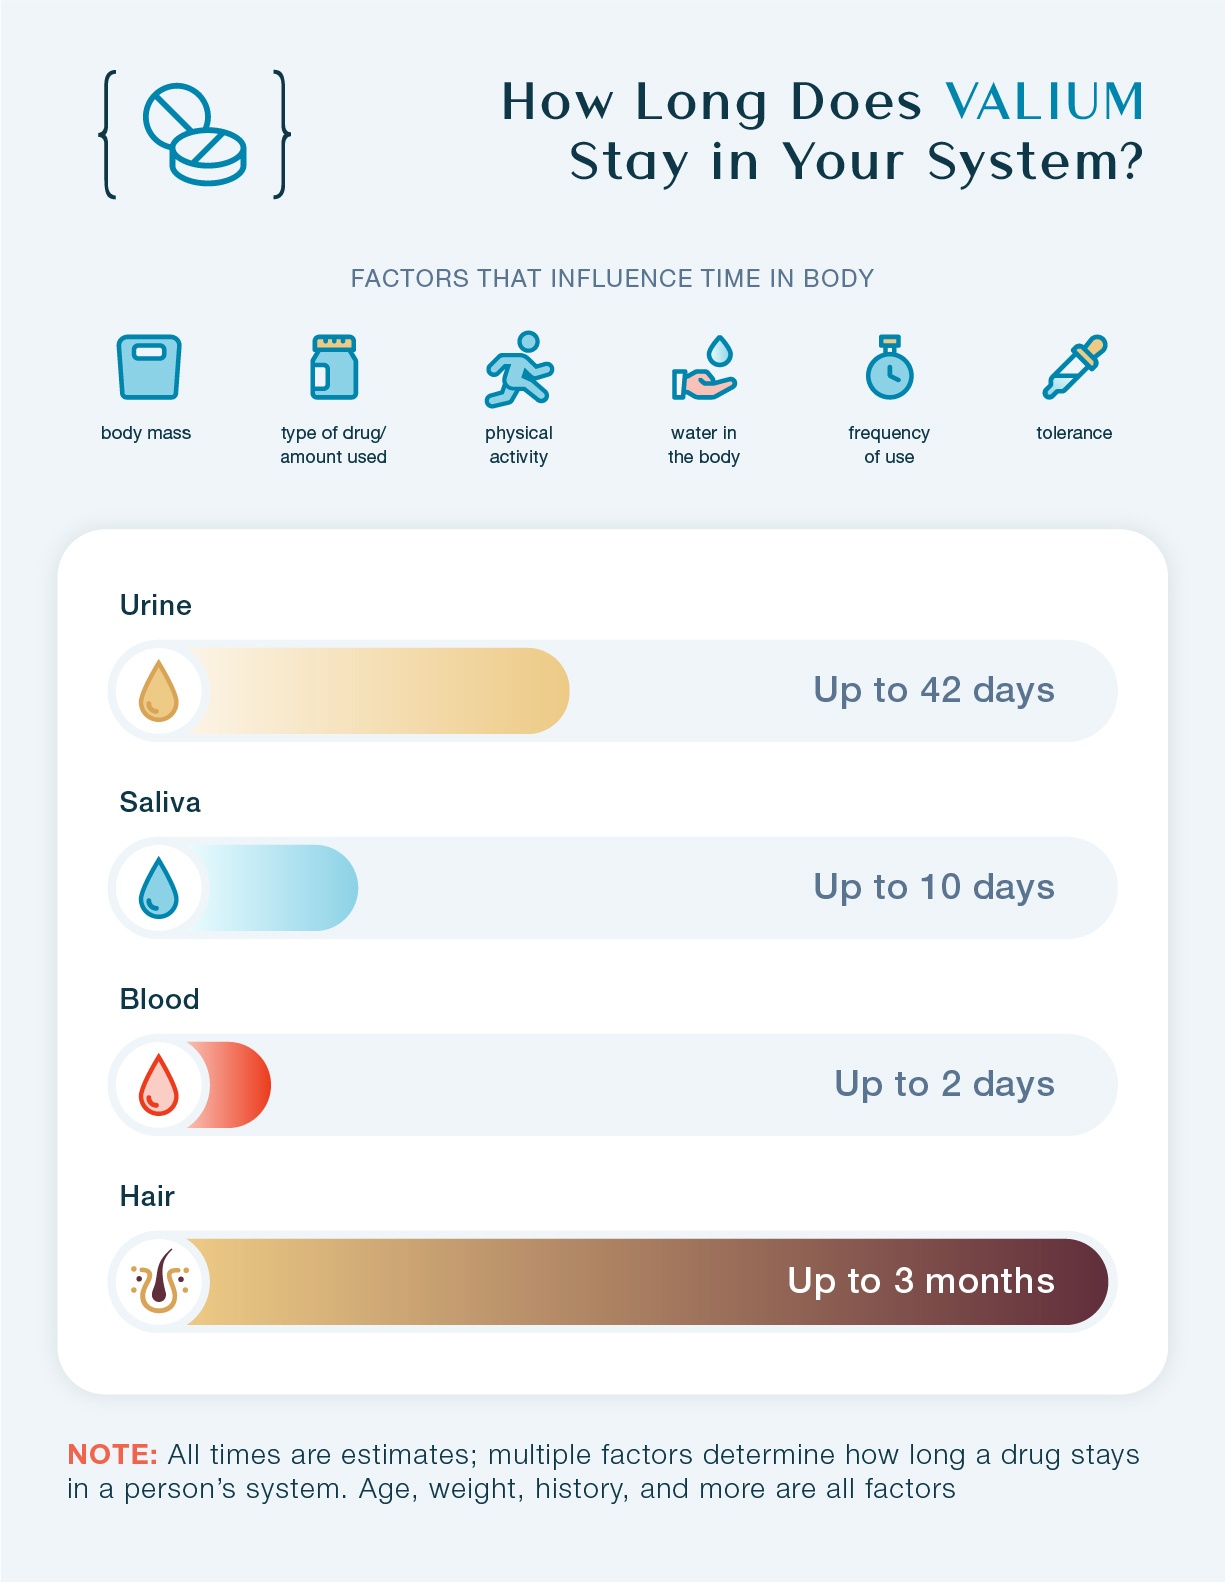 How Long Does Valium Stay In Your System? This chart shows how long Valium stays in urine, saliva, blood, and hair